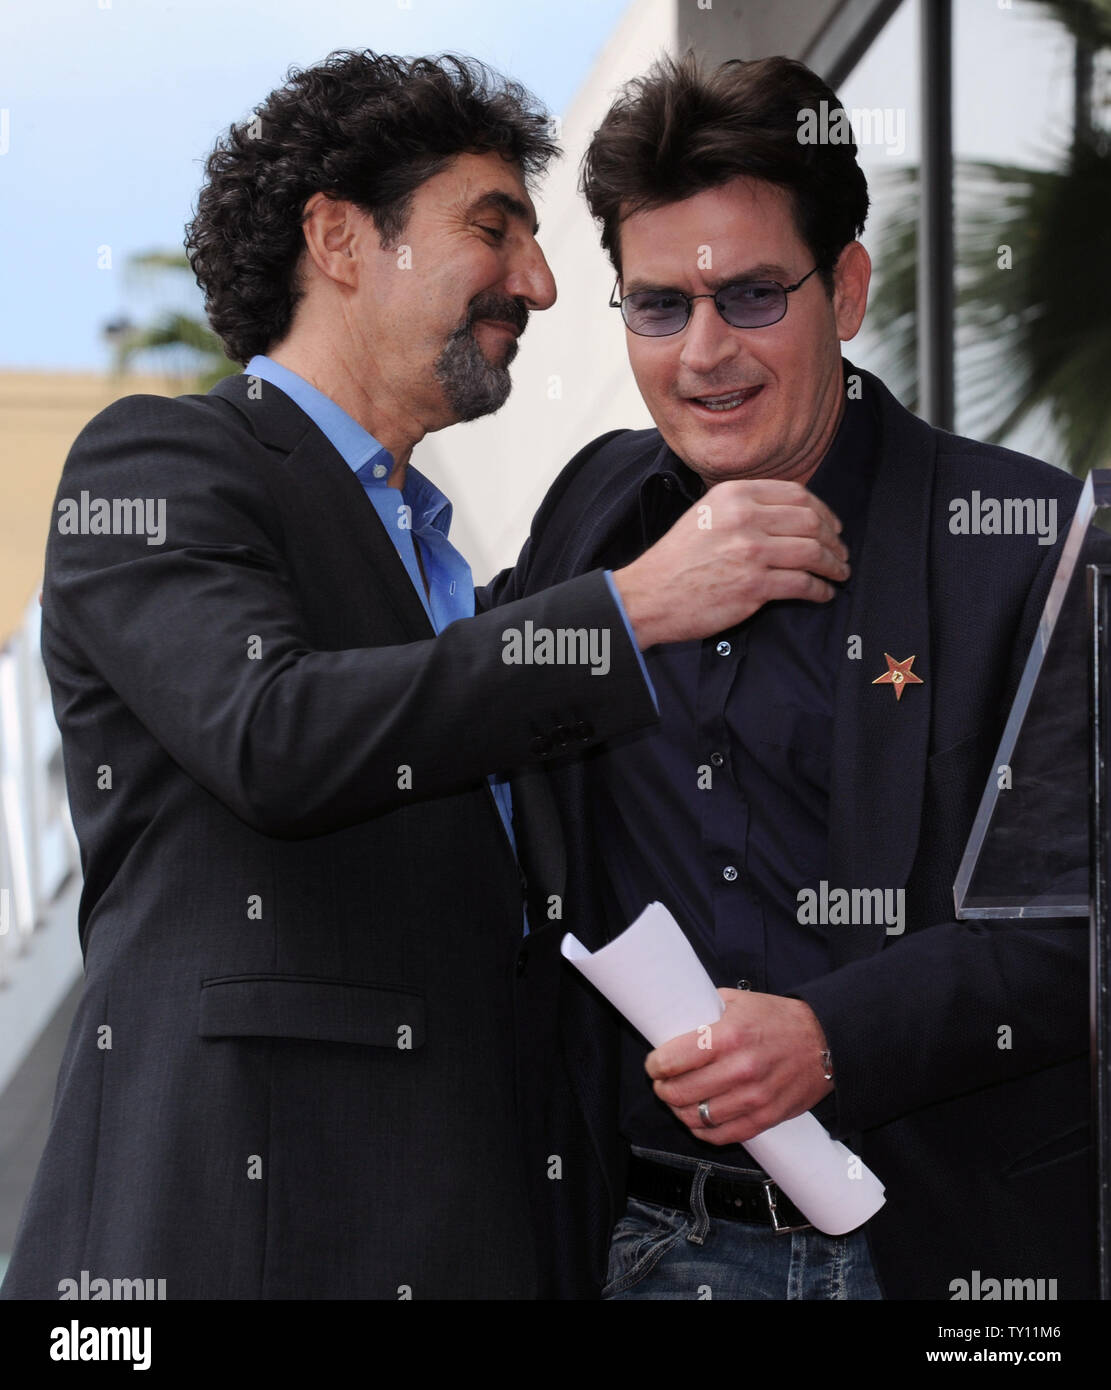 Chuck Lorre (L) is embraced by actor Charlie Shen during ceremonies honoring him with the 2,380th star on the Hollywood Walk of Fame in Los Angeles on March 12, 2009. Lorre produces and co-created CBS' 'The Big Bang Theory' and 'Two and Half Men'. He also produced 'Dharma & Greg'' and 'Grace Under Fire'. (UPI Photo/Jim Ruymen) Stock Photo